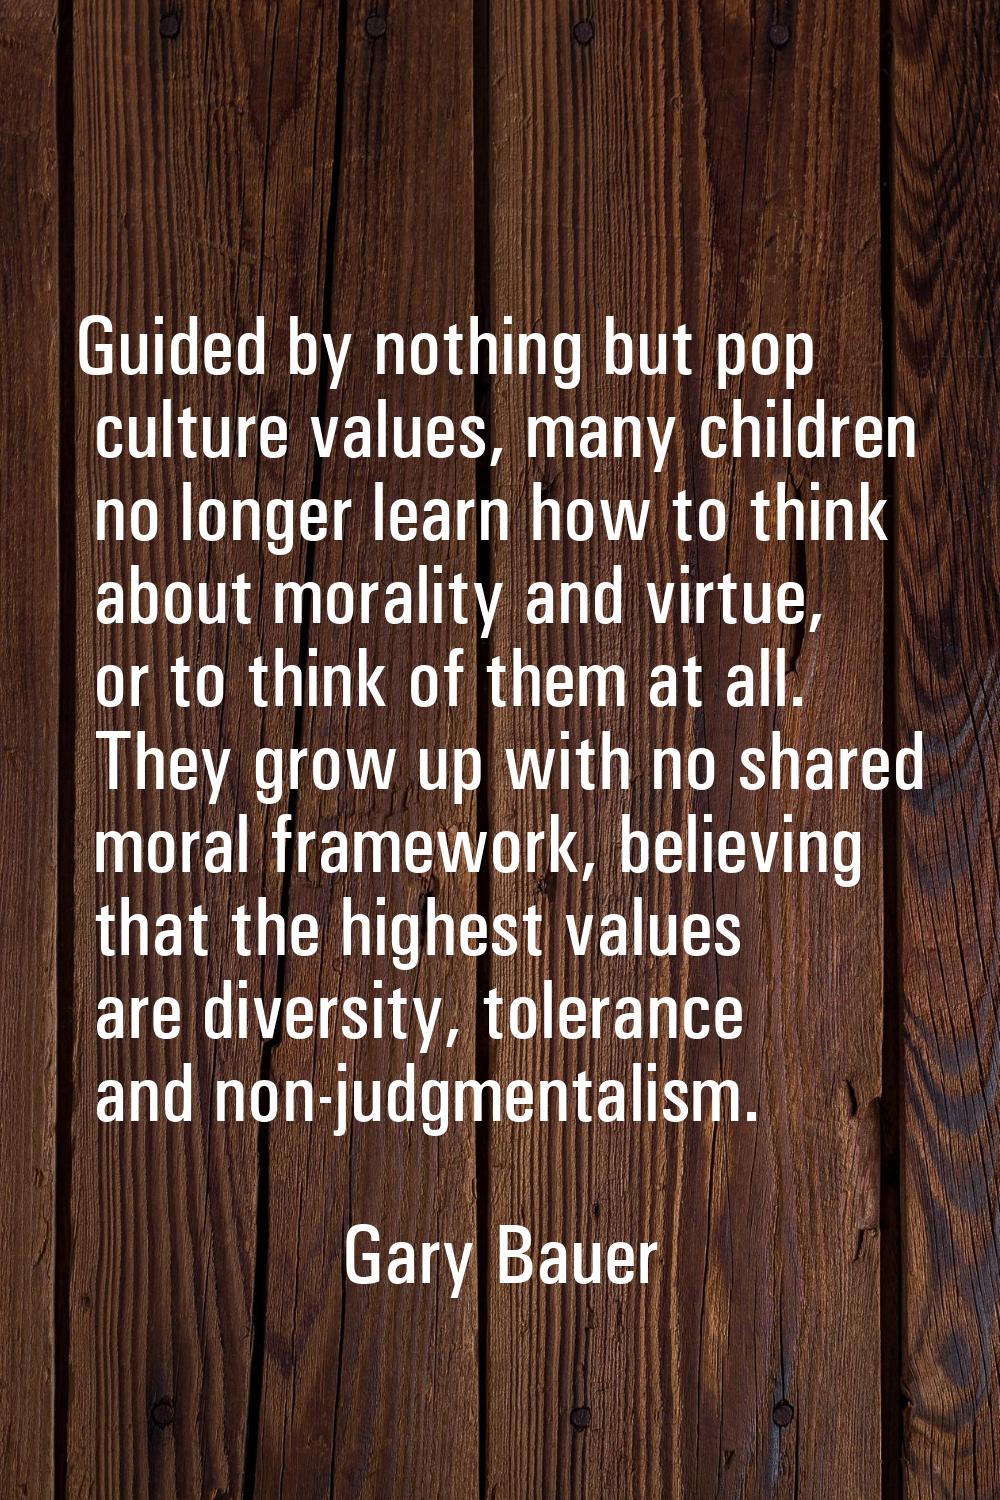 Guided by nothing but pop culture values, many children no longer learn how to think about morality